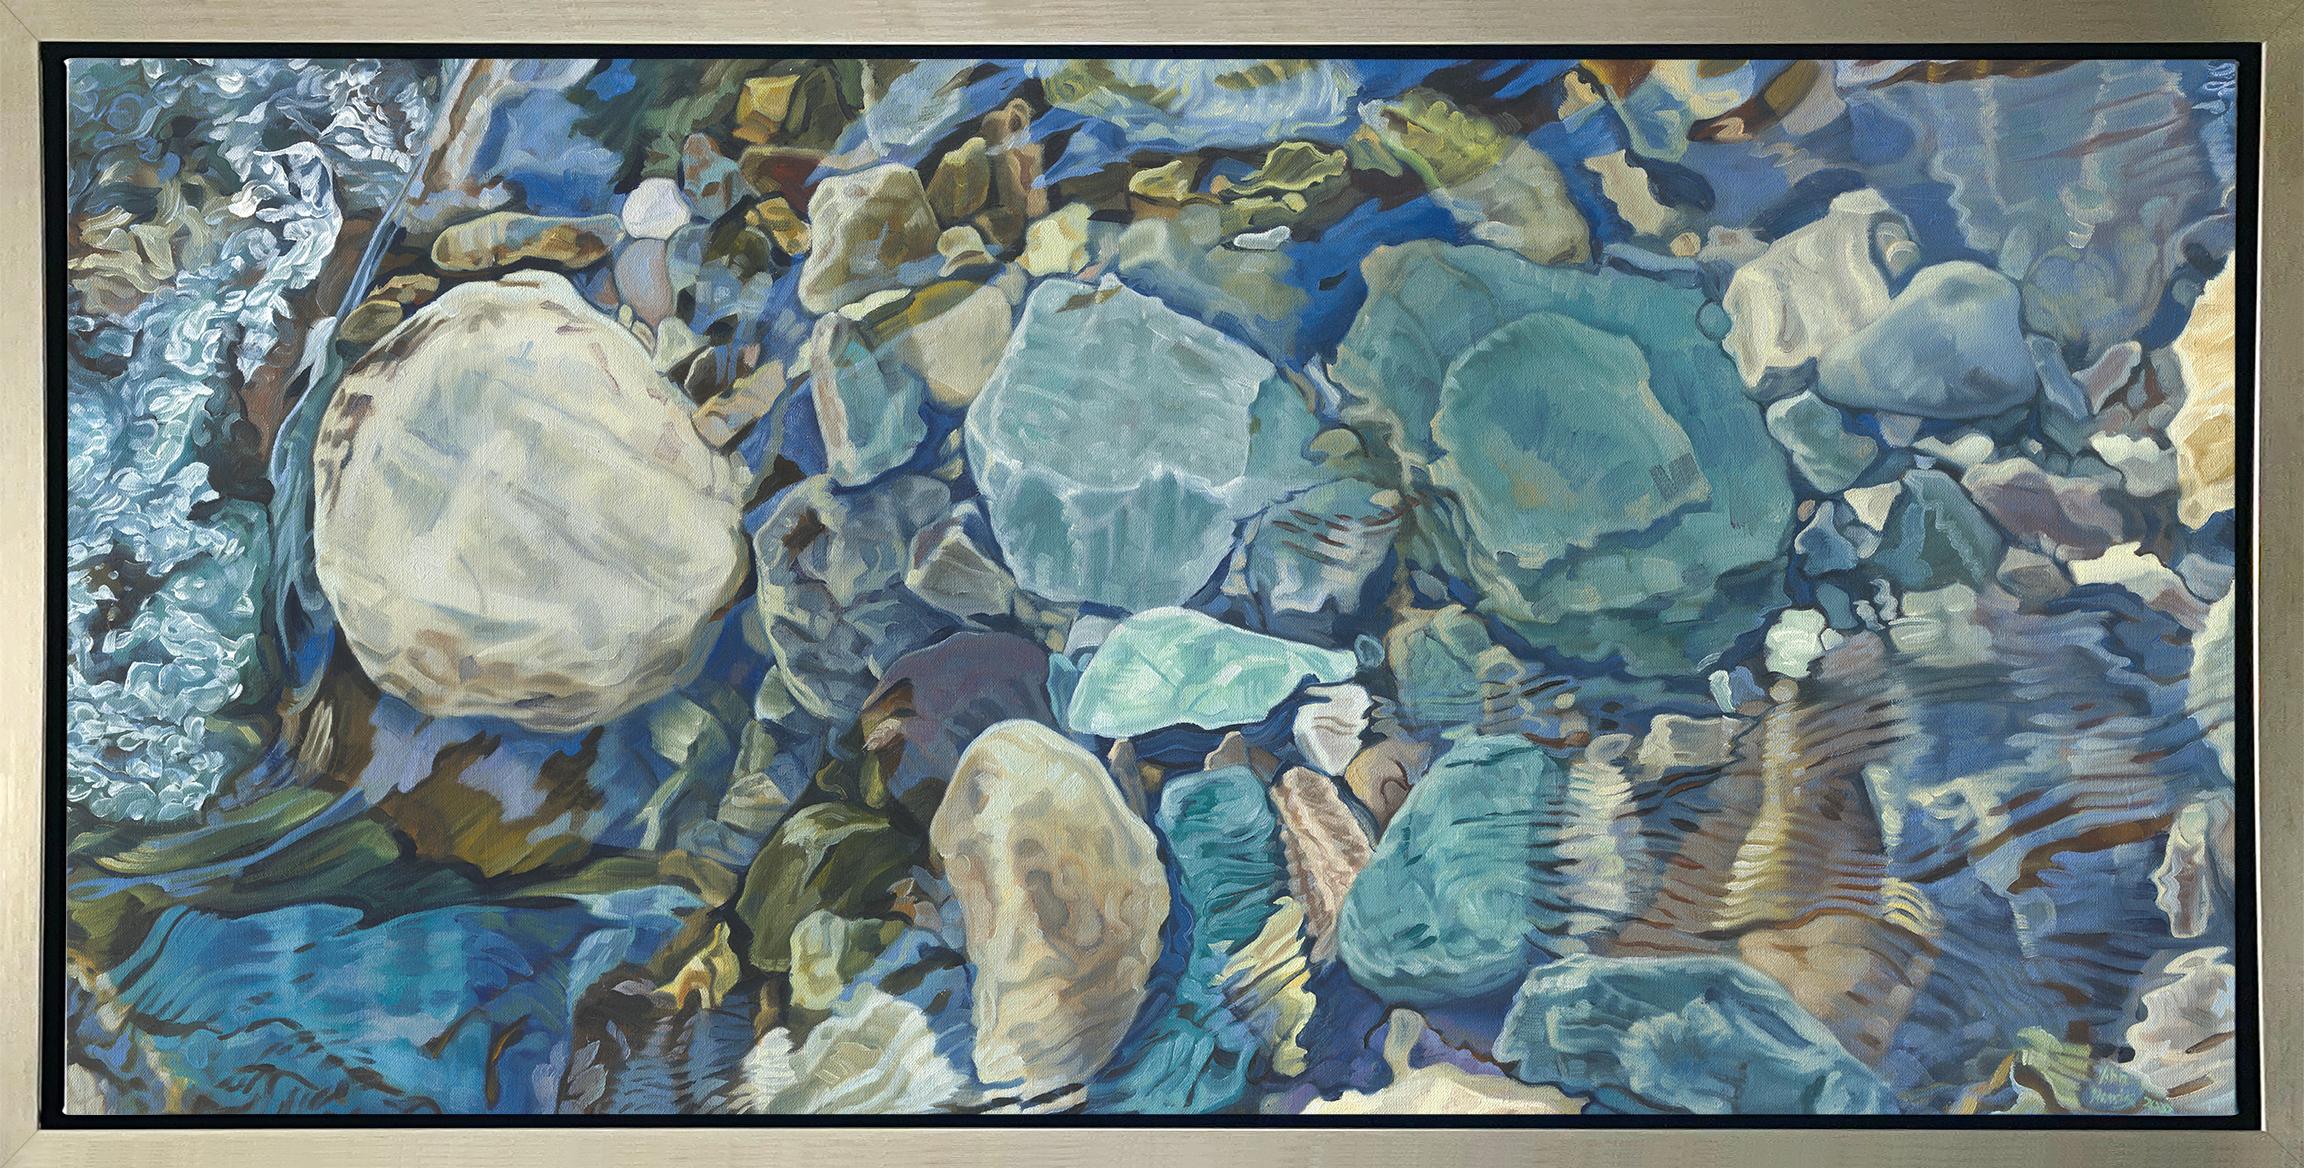 "Rocky River 8" Framed Limited Edition Giclee Print, 30" x 60"